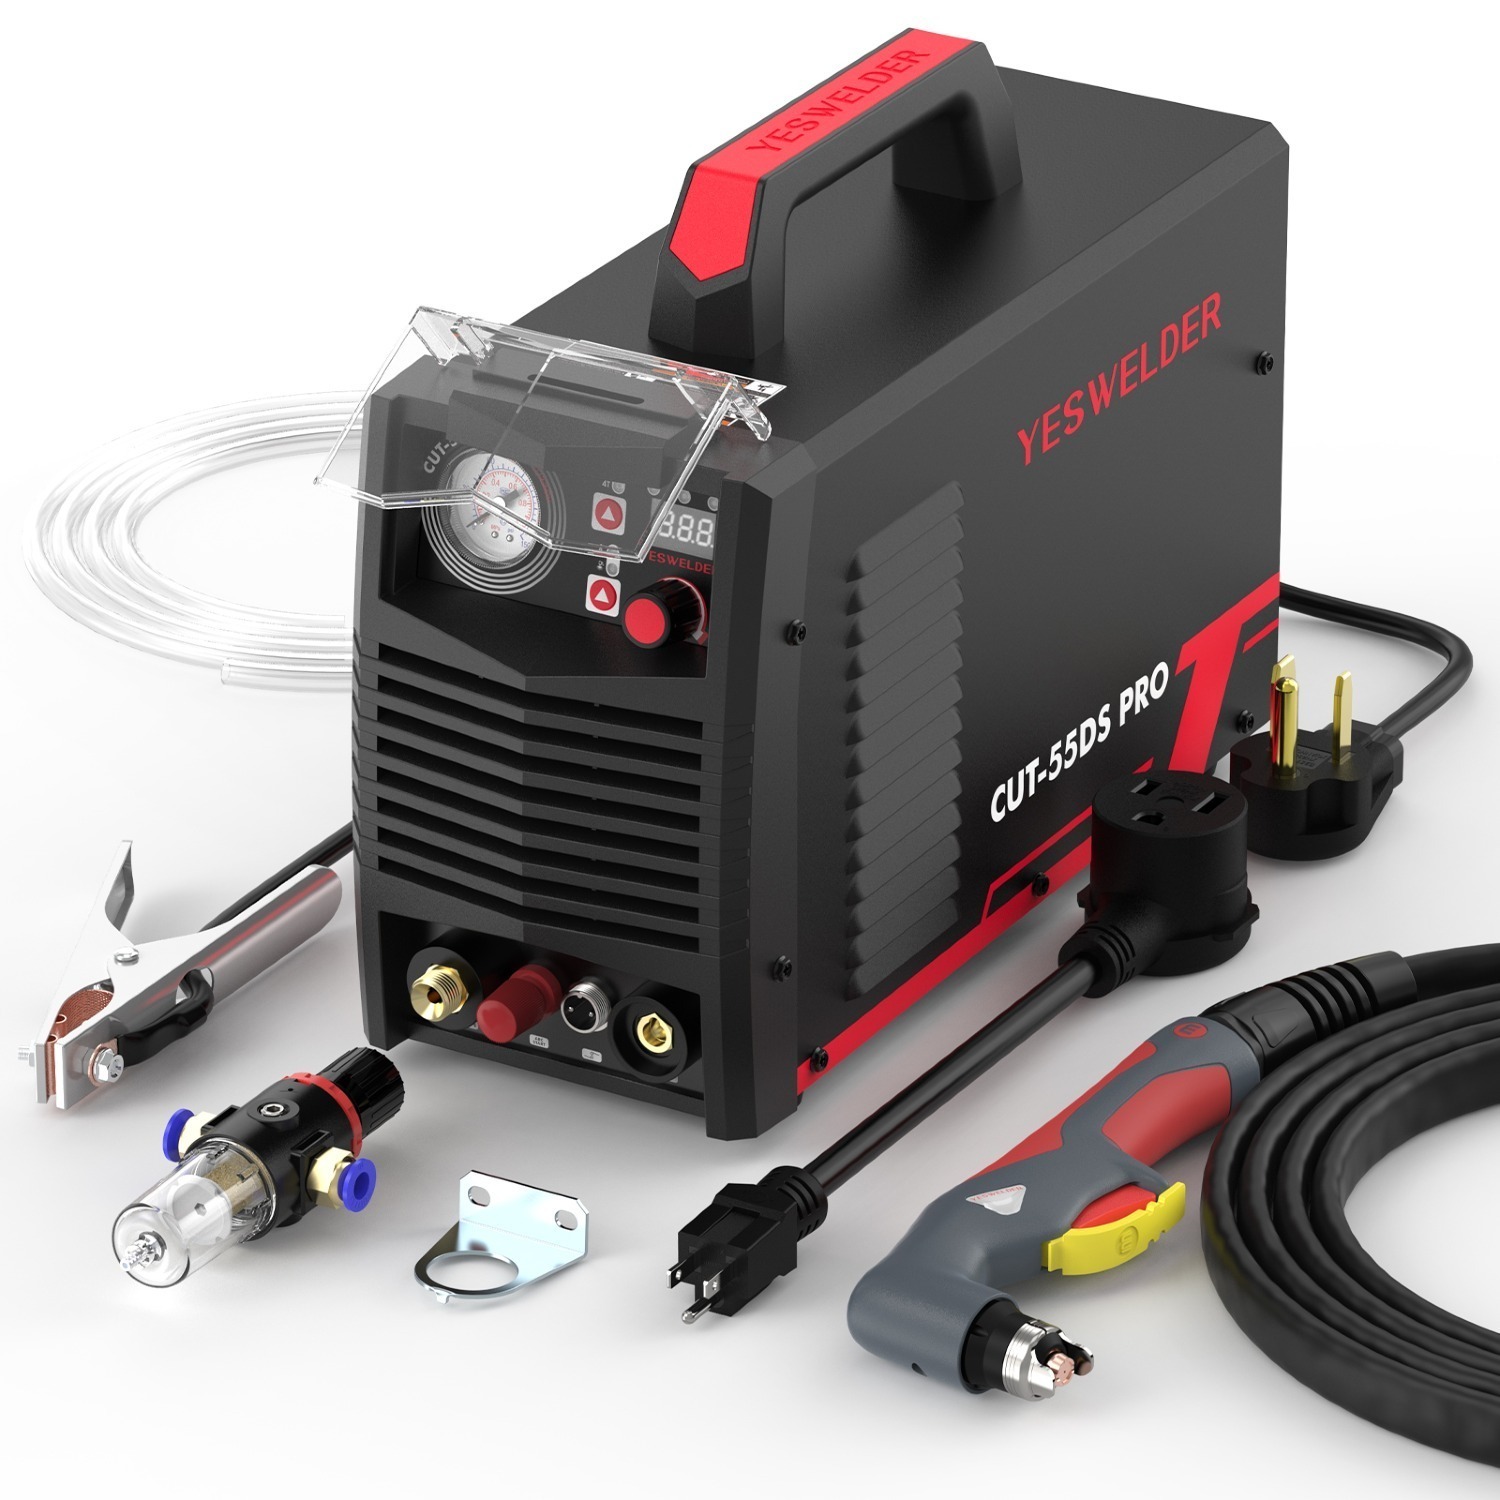 YESWELDER  CUT-55DS Pro Non-High Frequency Non-Touch Pilot Arc Plasma Cutter $199.39 + Free Shipping